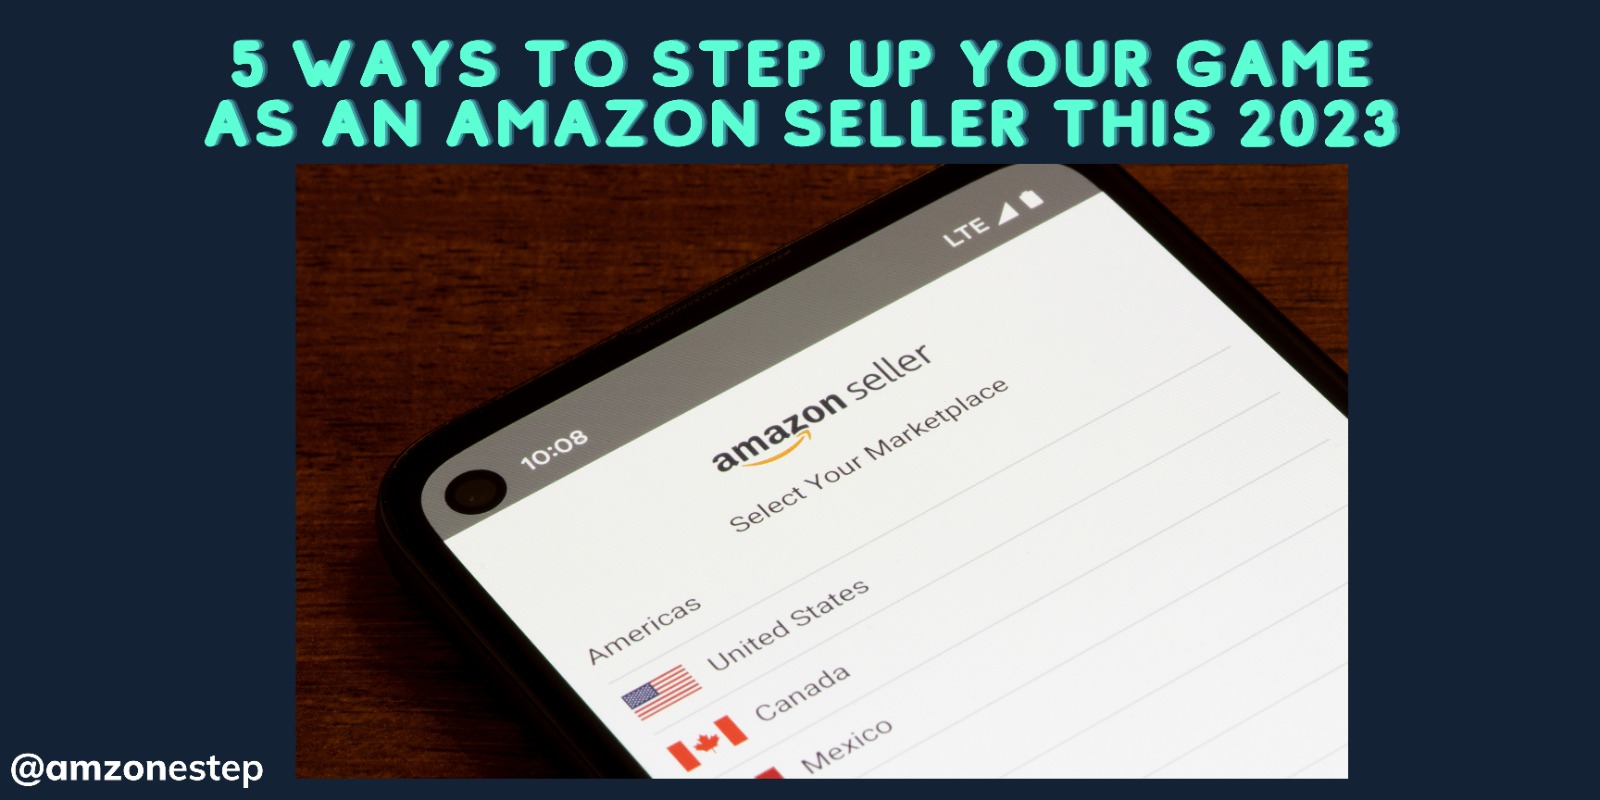 5 Ways to Step up Your Game as an Amazon Seller This 2023